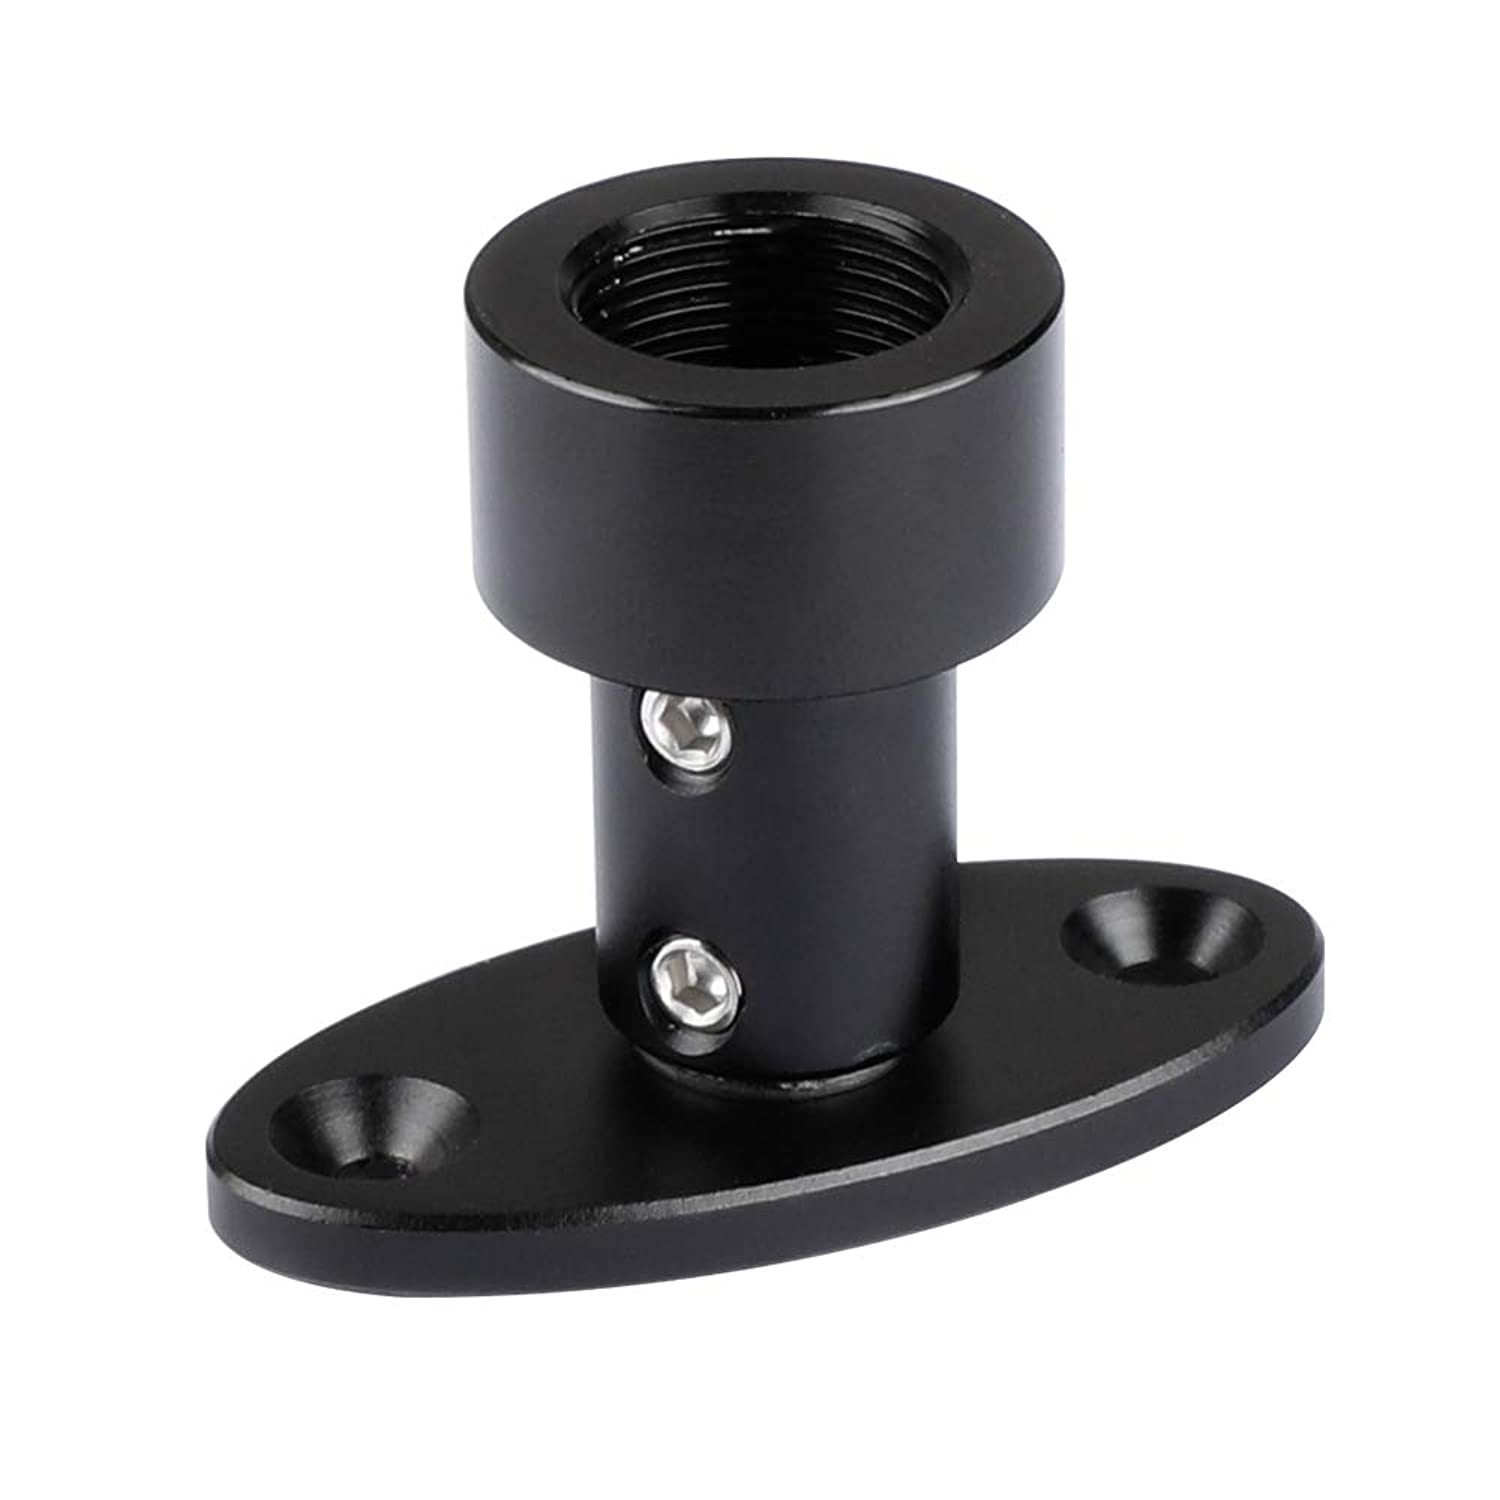 CAMVATE Table/Ceiling Mount with 5/8-27 Female Thread for Microphone